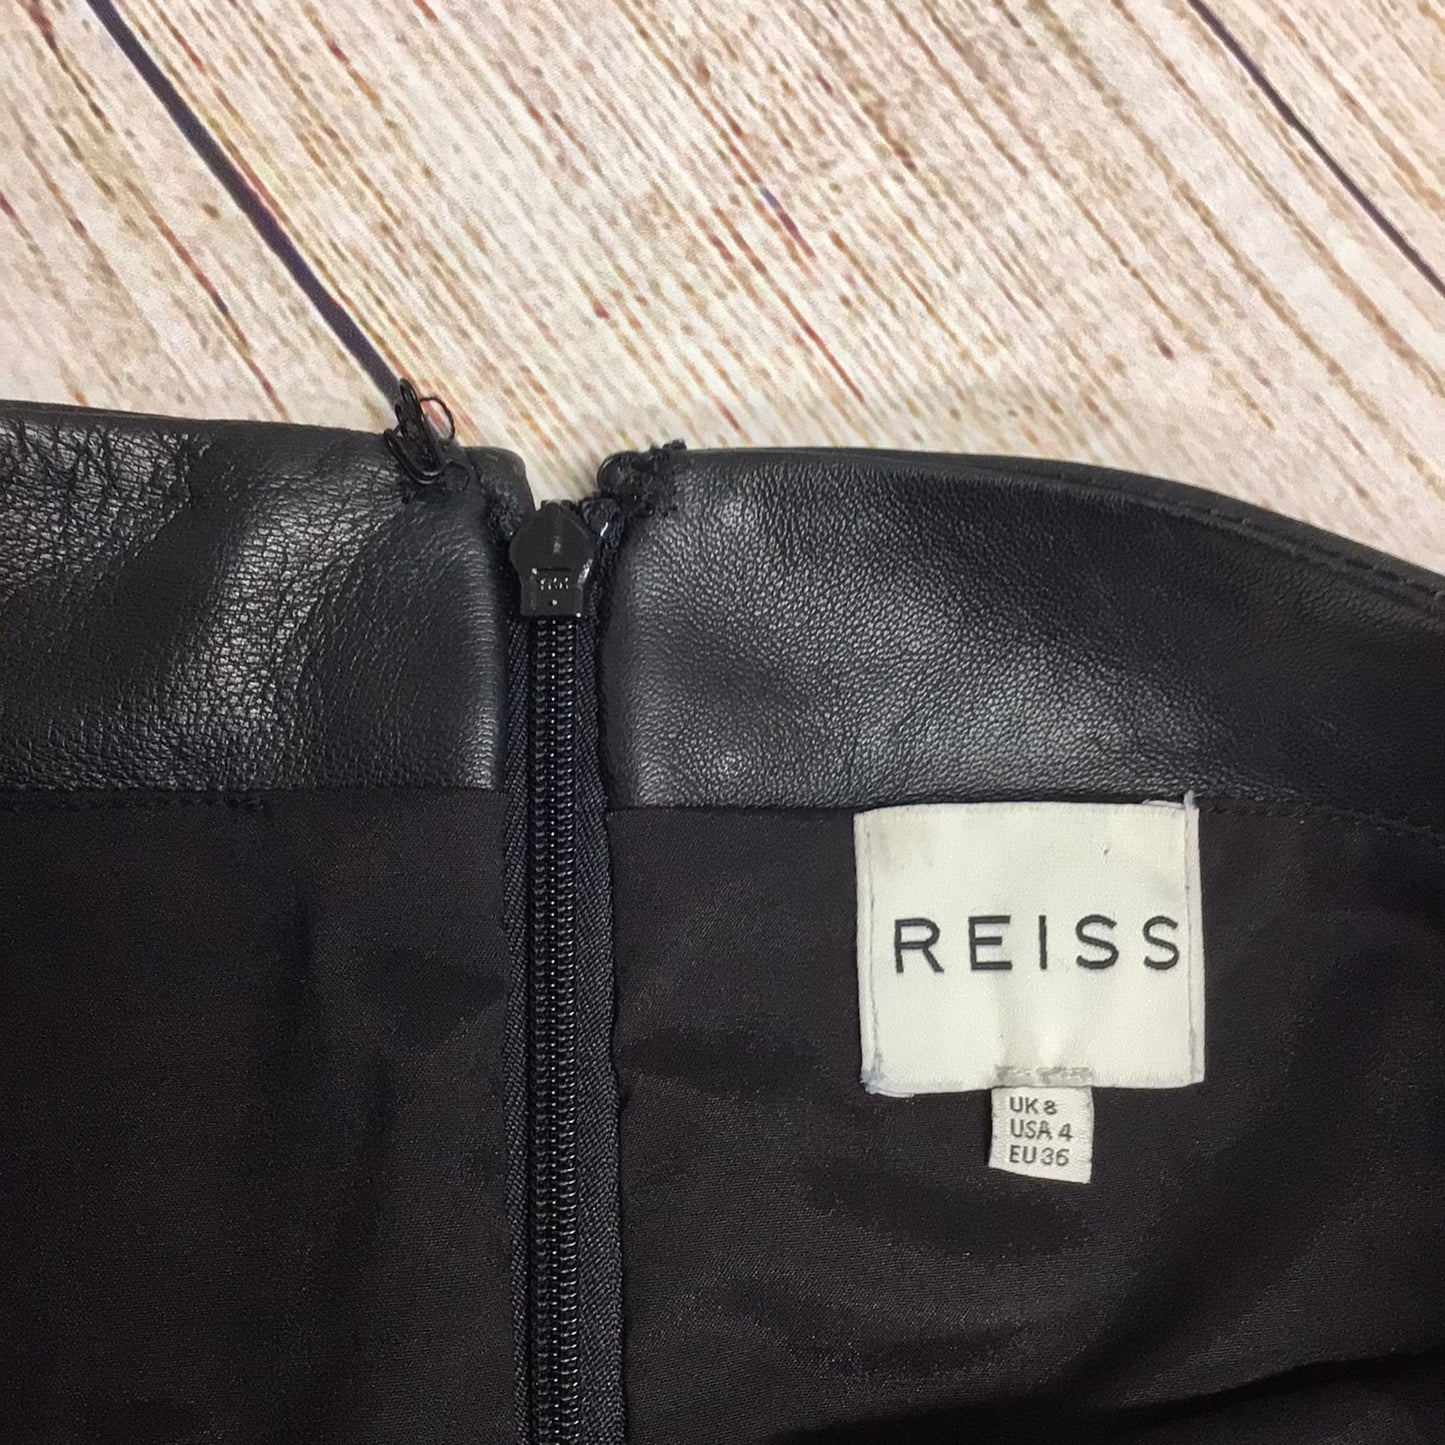 Reiss Black 100% Leather Pencil Skirt Size 8